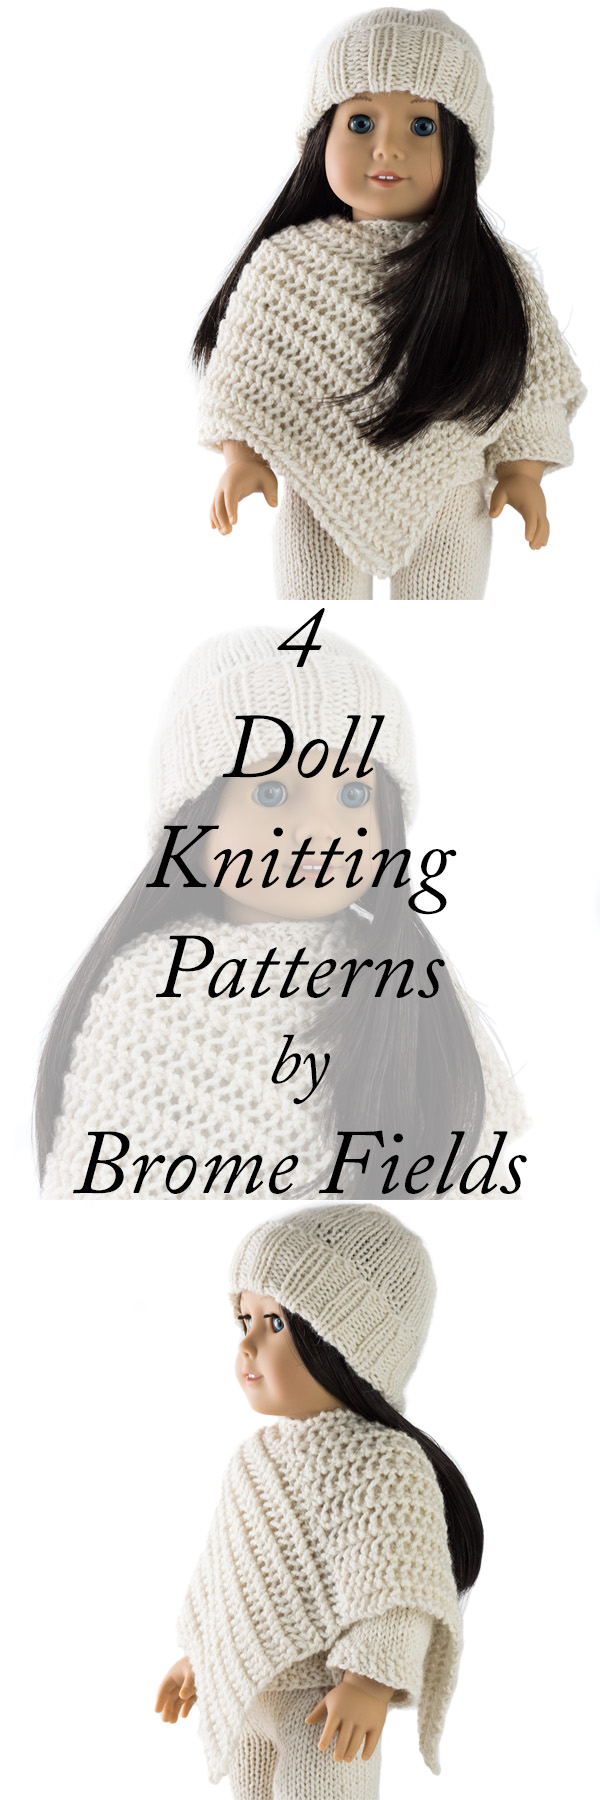 Free Knitting Patterns For Dolls Hats Cozy Outfit Doll Hat Sweater Poncho And Pants Knitting Patterns